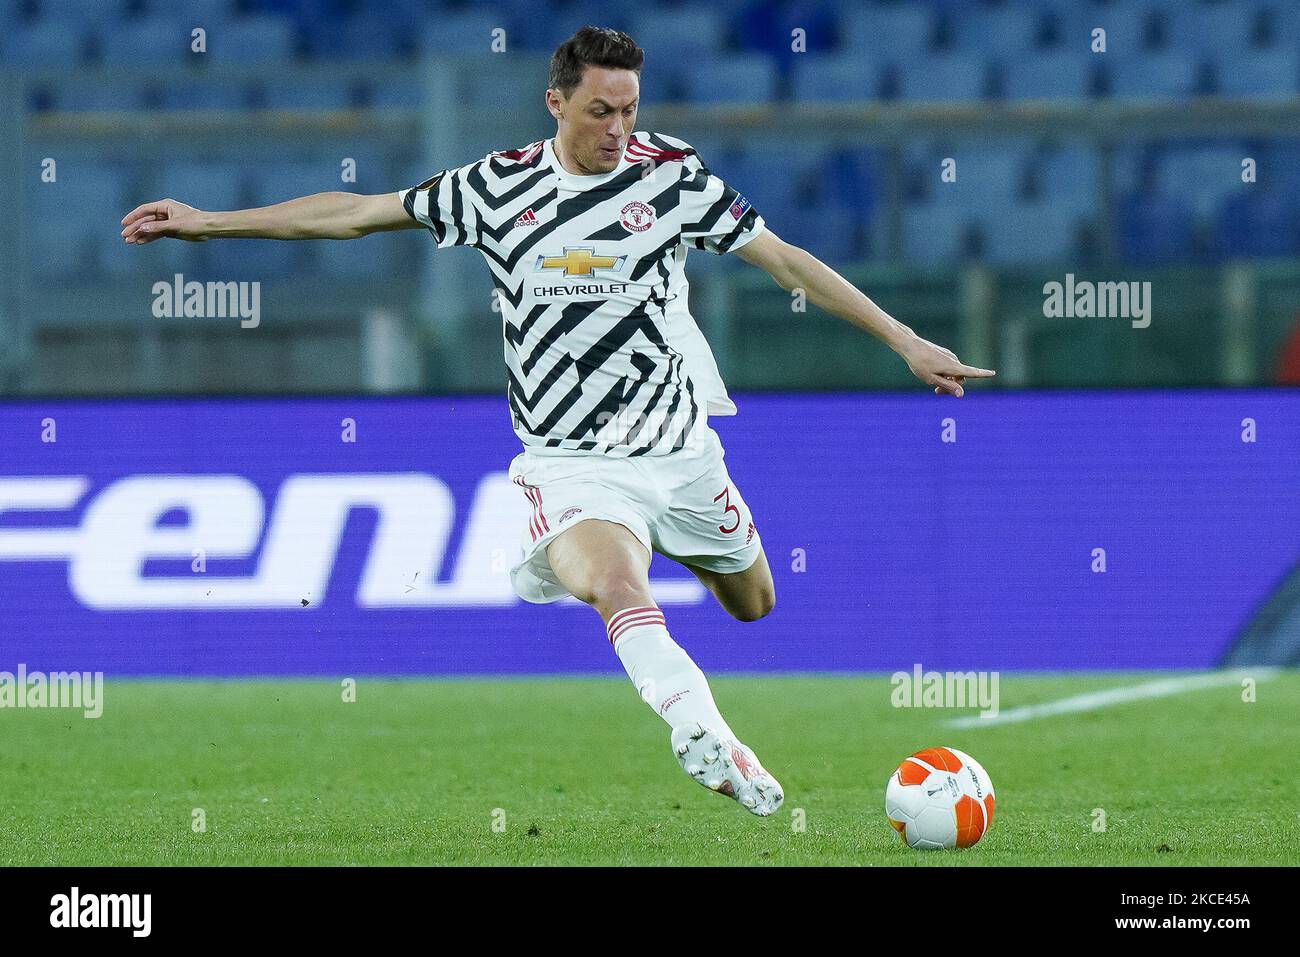 Nemanja Matic of Manchester United during the UEFA Europa League Semi-Final match between AS Roma and Manchester United at Stadio Olimpico, Rome, Italy on 6 May 2021. (Photo by Giuseppe Maffia/NurPhoto) Stock Photo